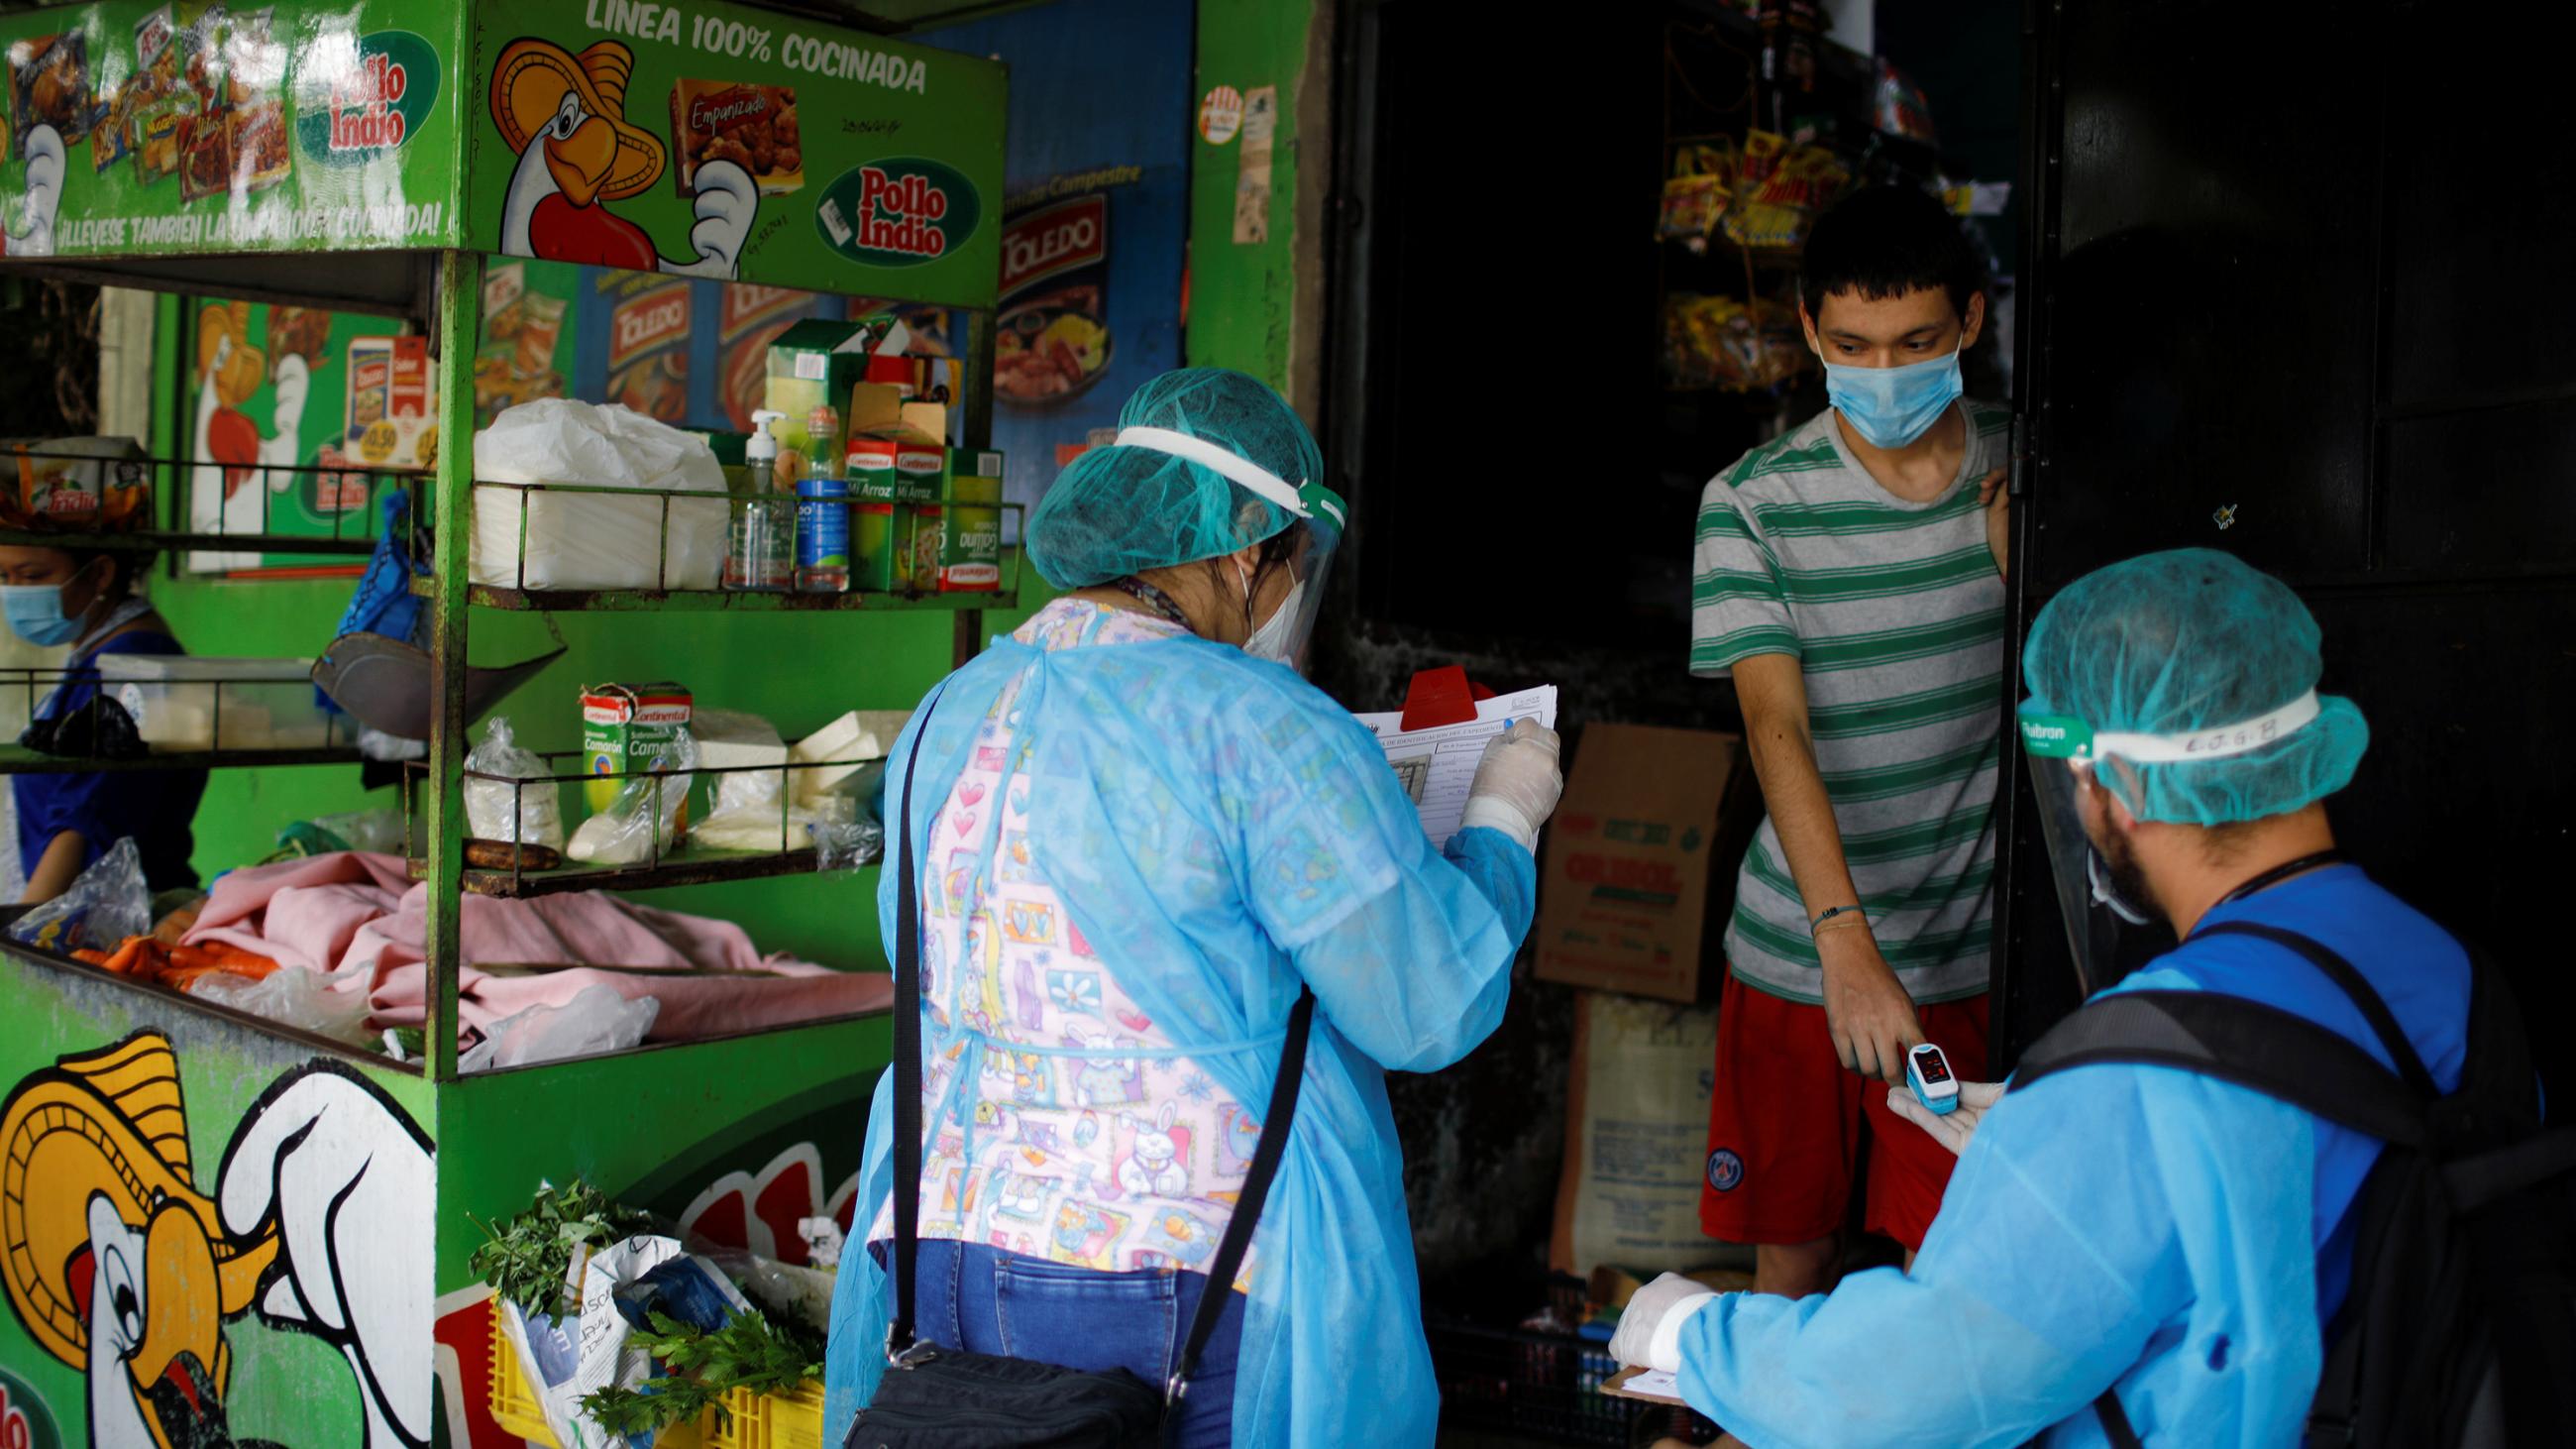 The photo shows two health workers interviewing a young person at the entrance of a small market. 